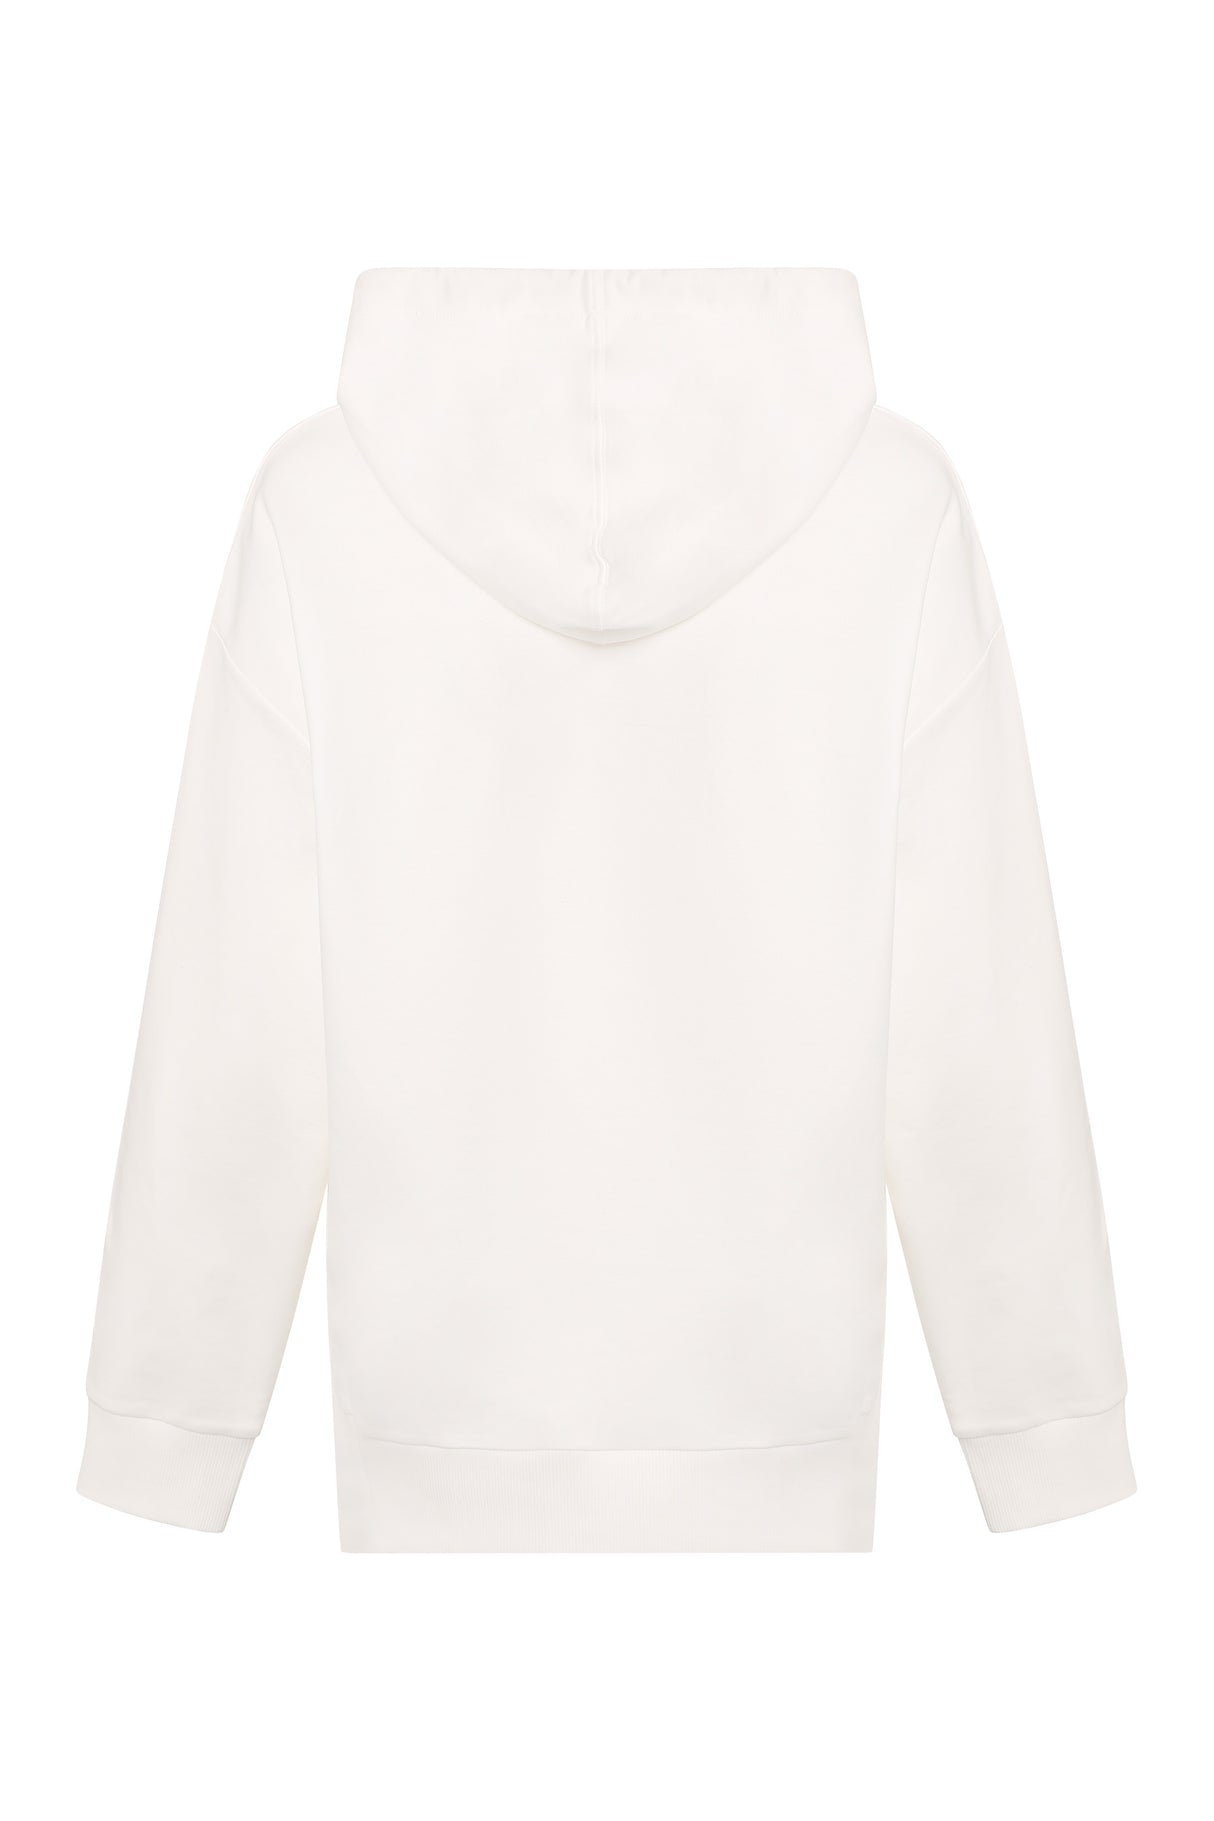 MONCLER White Hooded Sweatshirt for Women - SS24 Collection